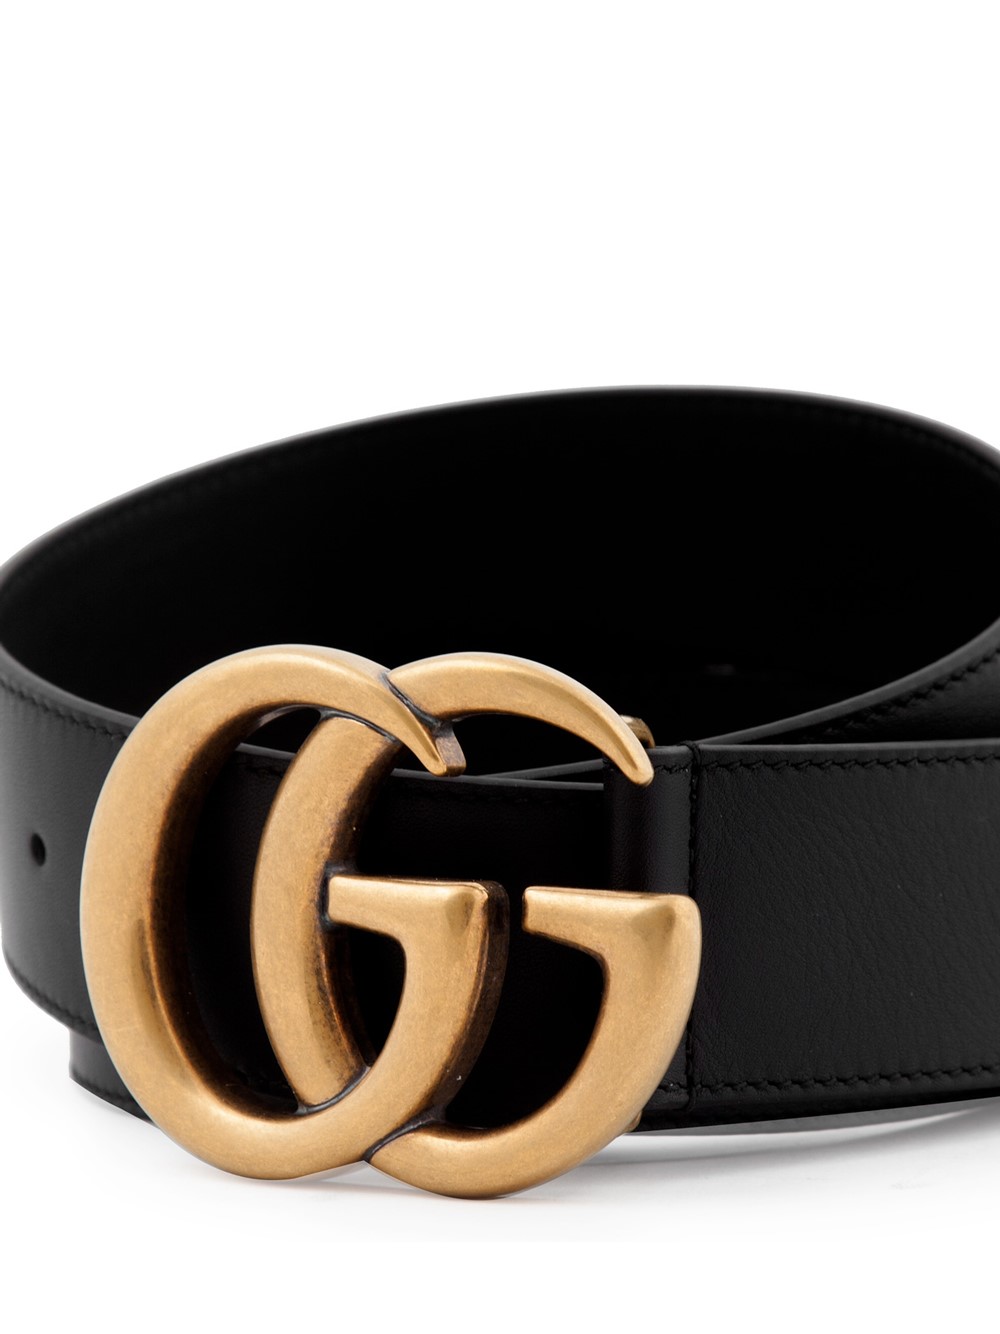 gucci GG MARMONT BELT available on mediakits.theygsgroup.com - 28984